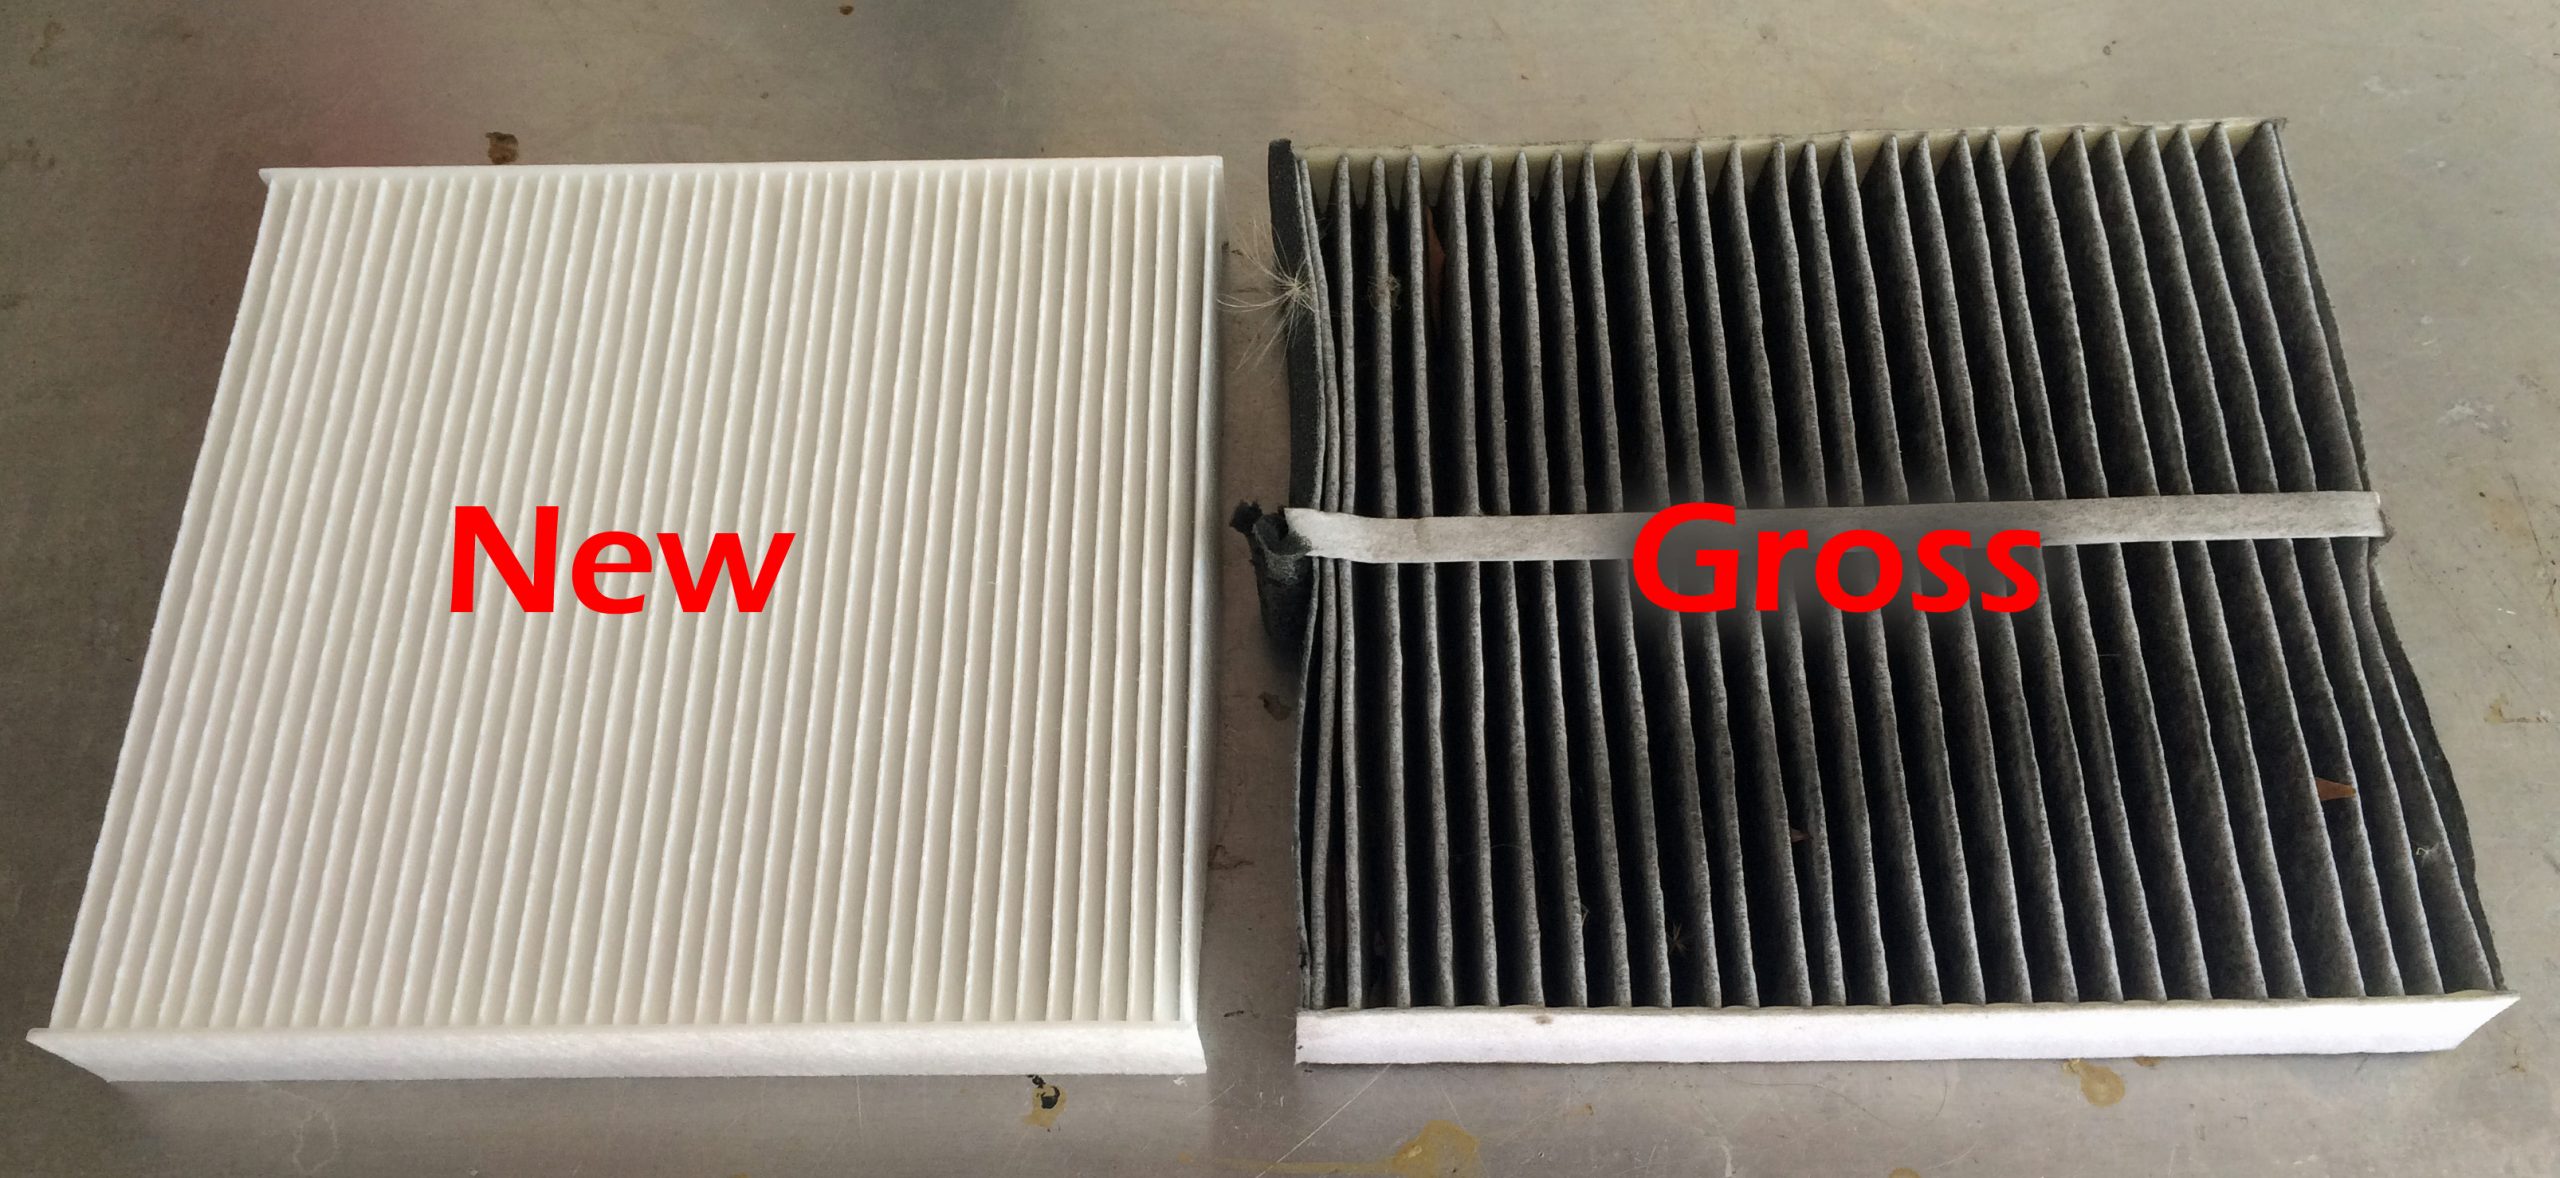 https://www.onallcylinders.com/wp-content/uploads/2021/07/27/cabin-air-filter-new-old-comparison-scaled.jpg